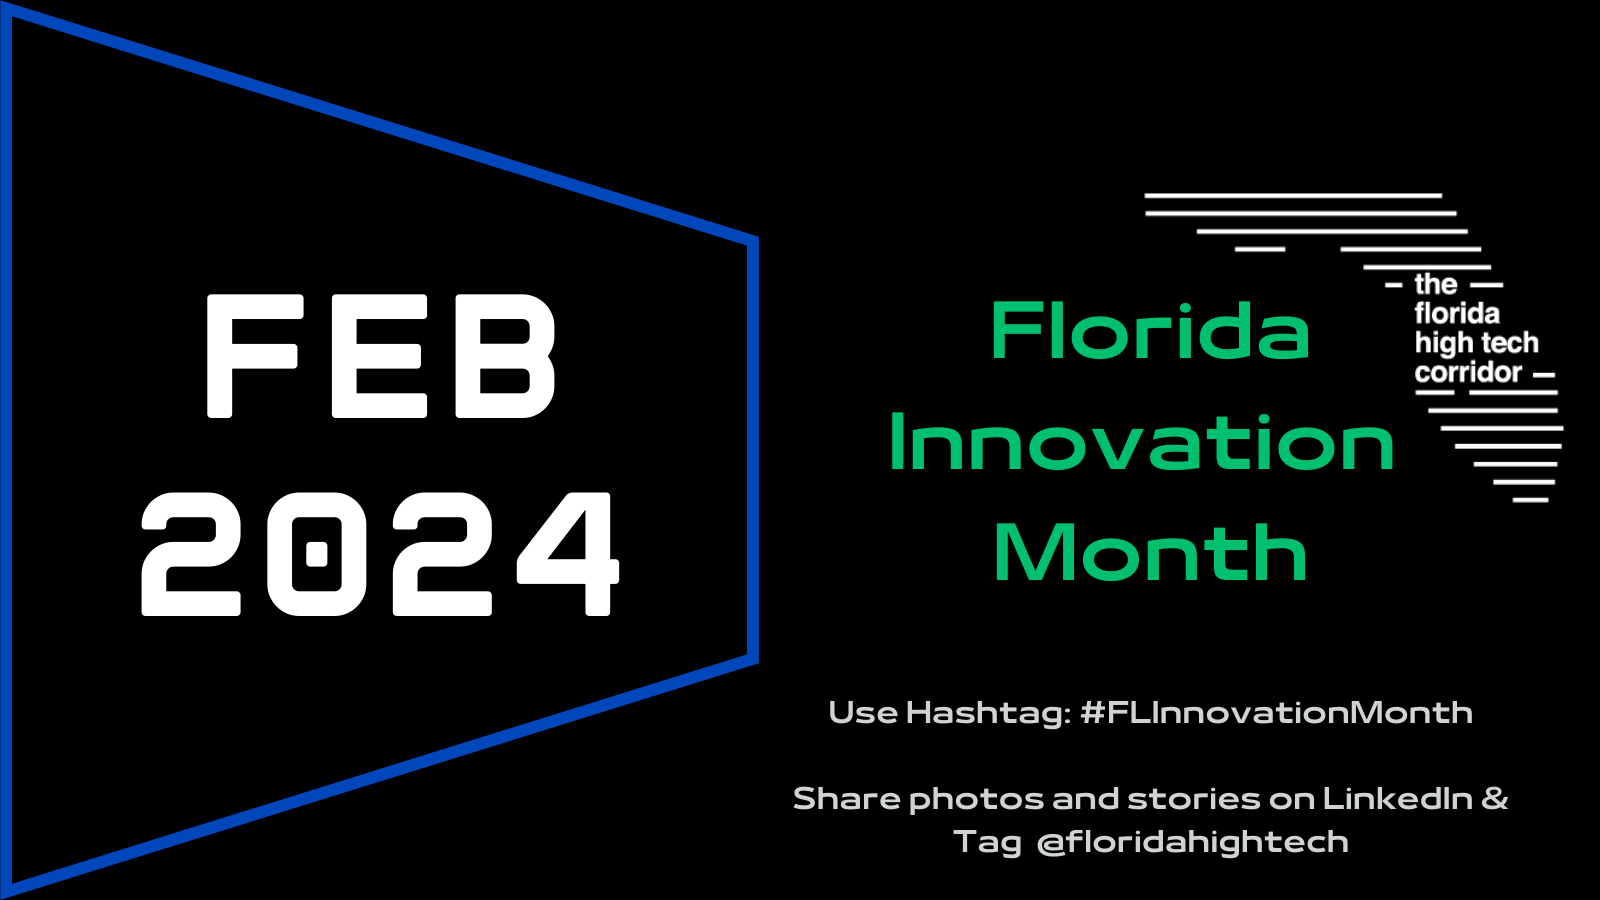 Florida Innovation Month Announcement Image